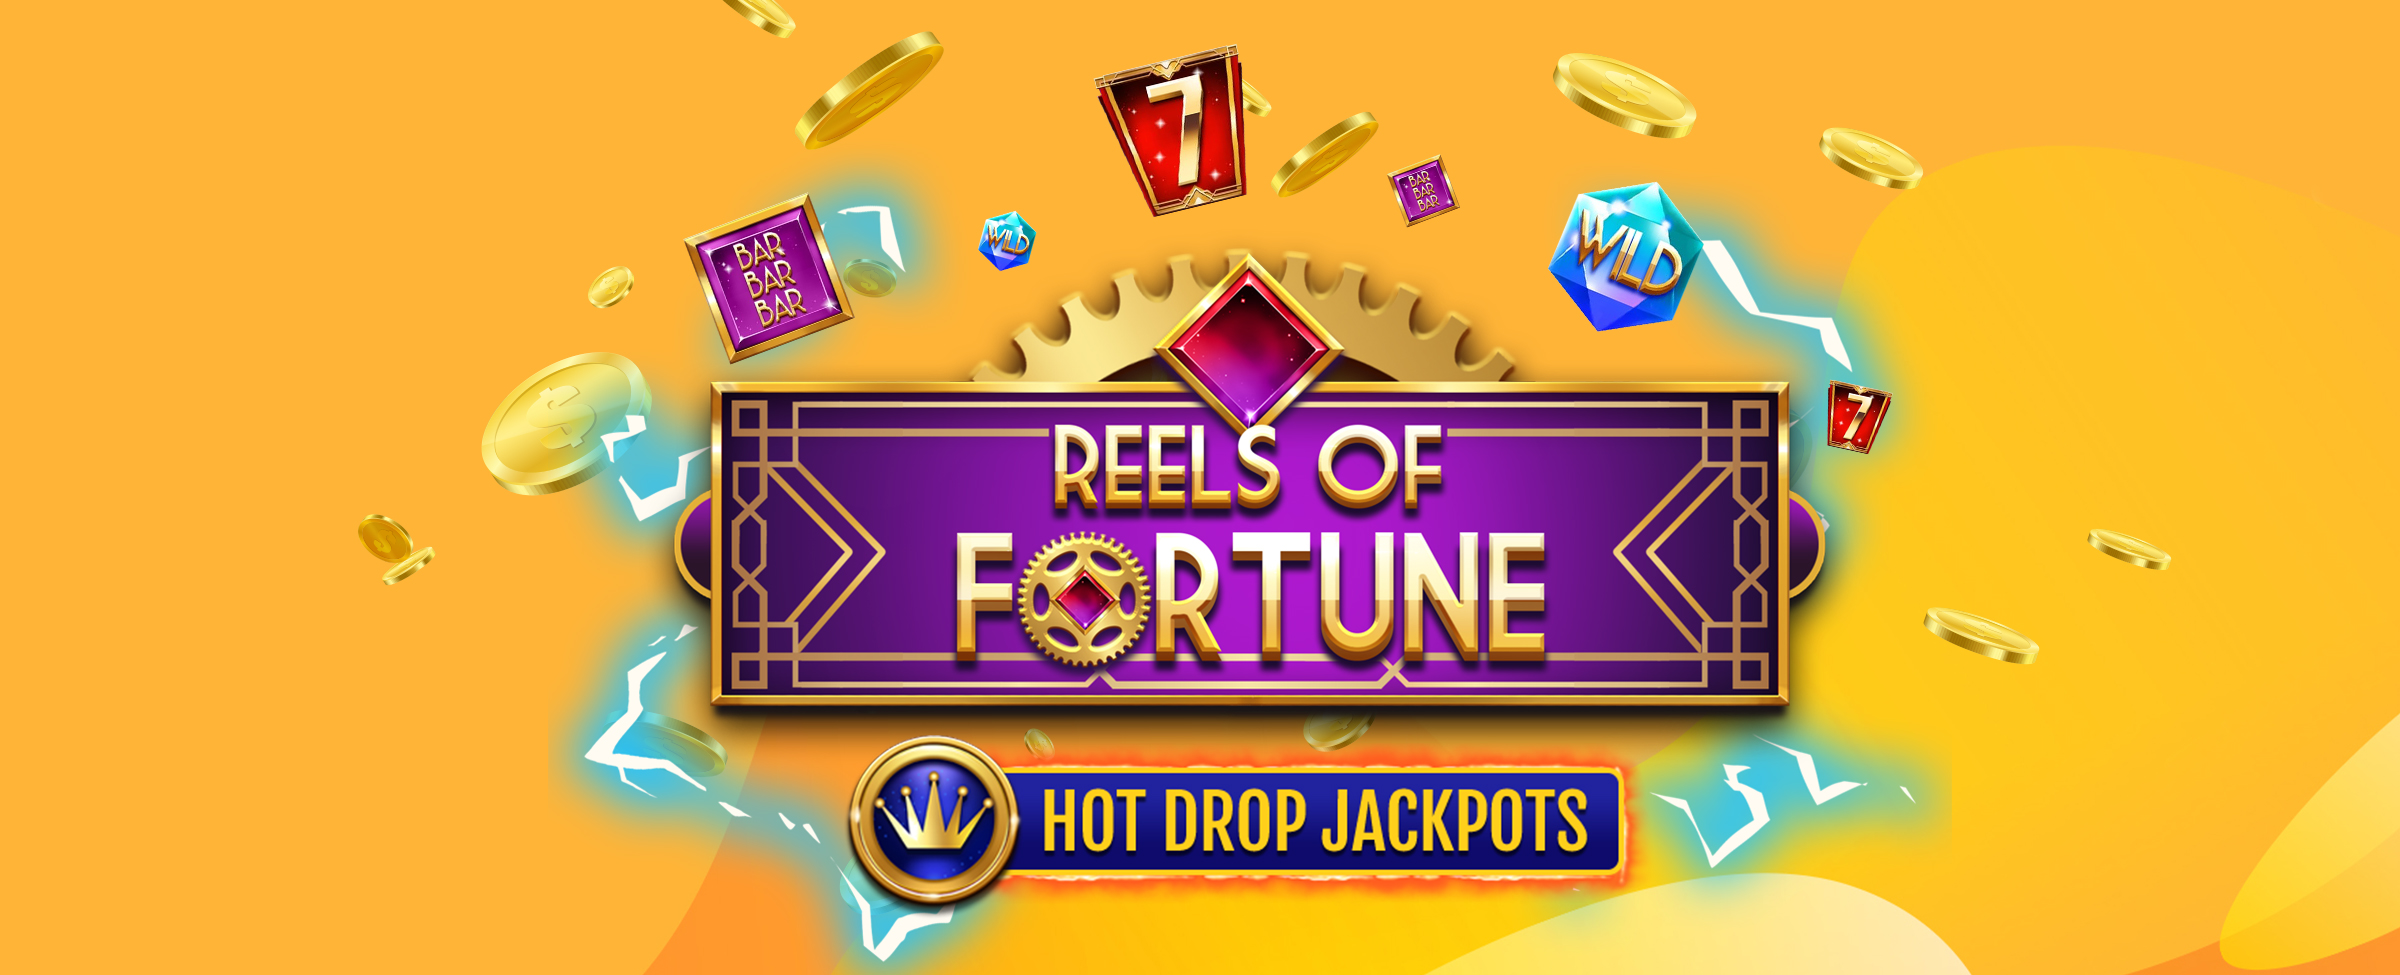 Play for three Hot Drop Jackpots in our new Reels of Fortune slot at SlotsLV!